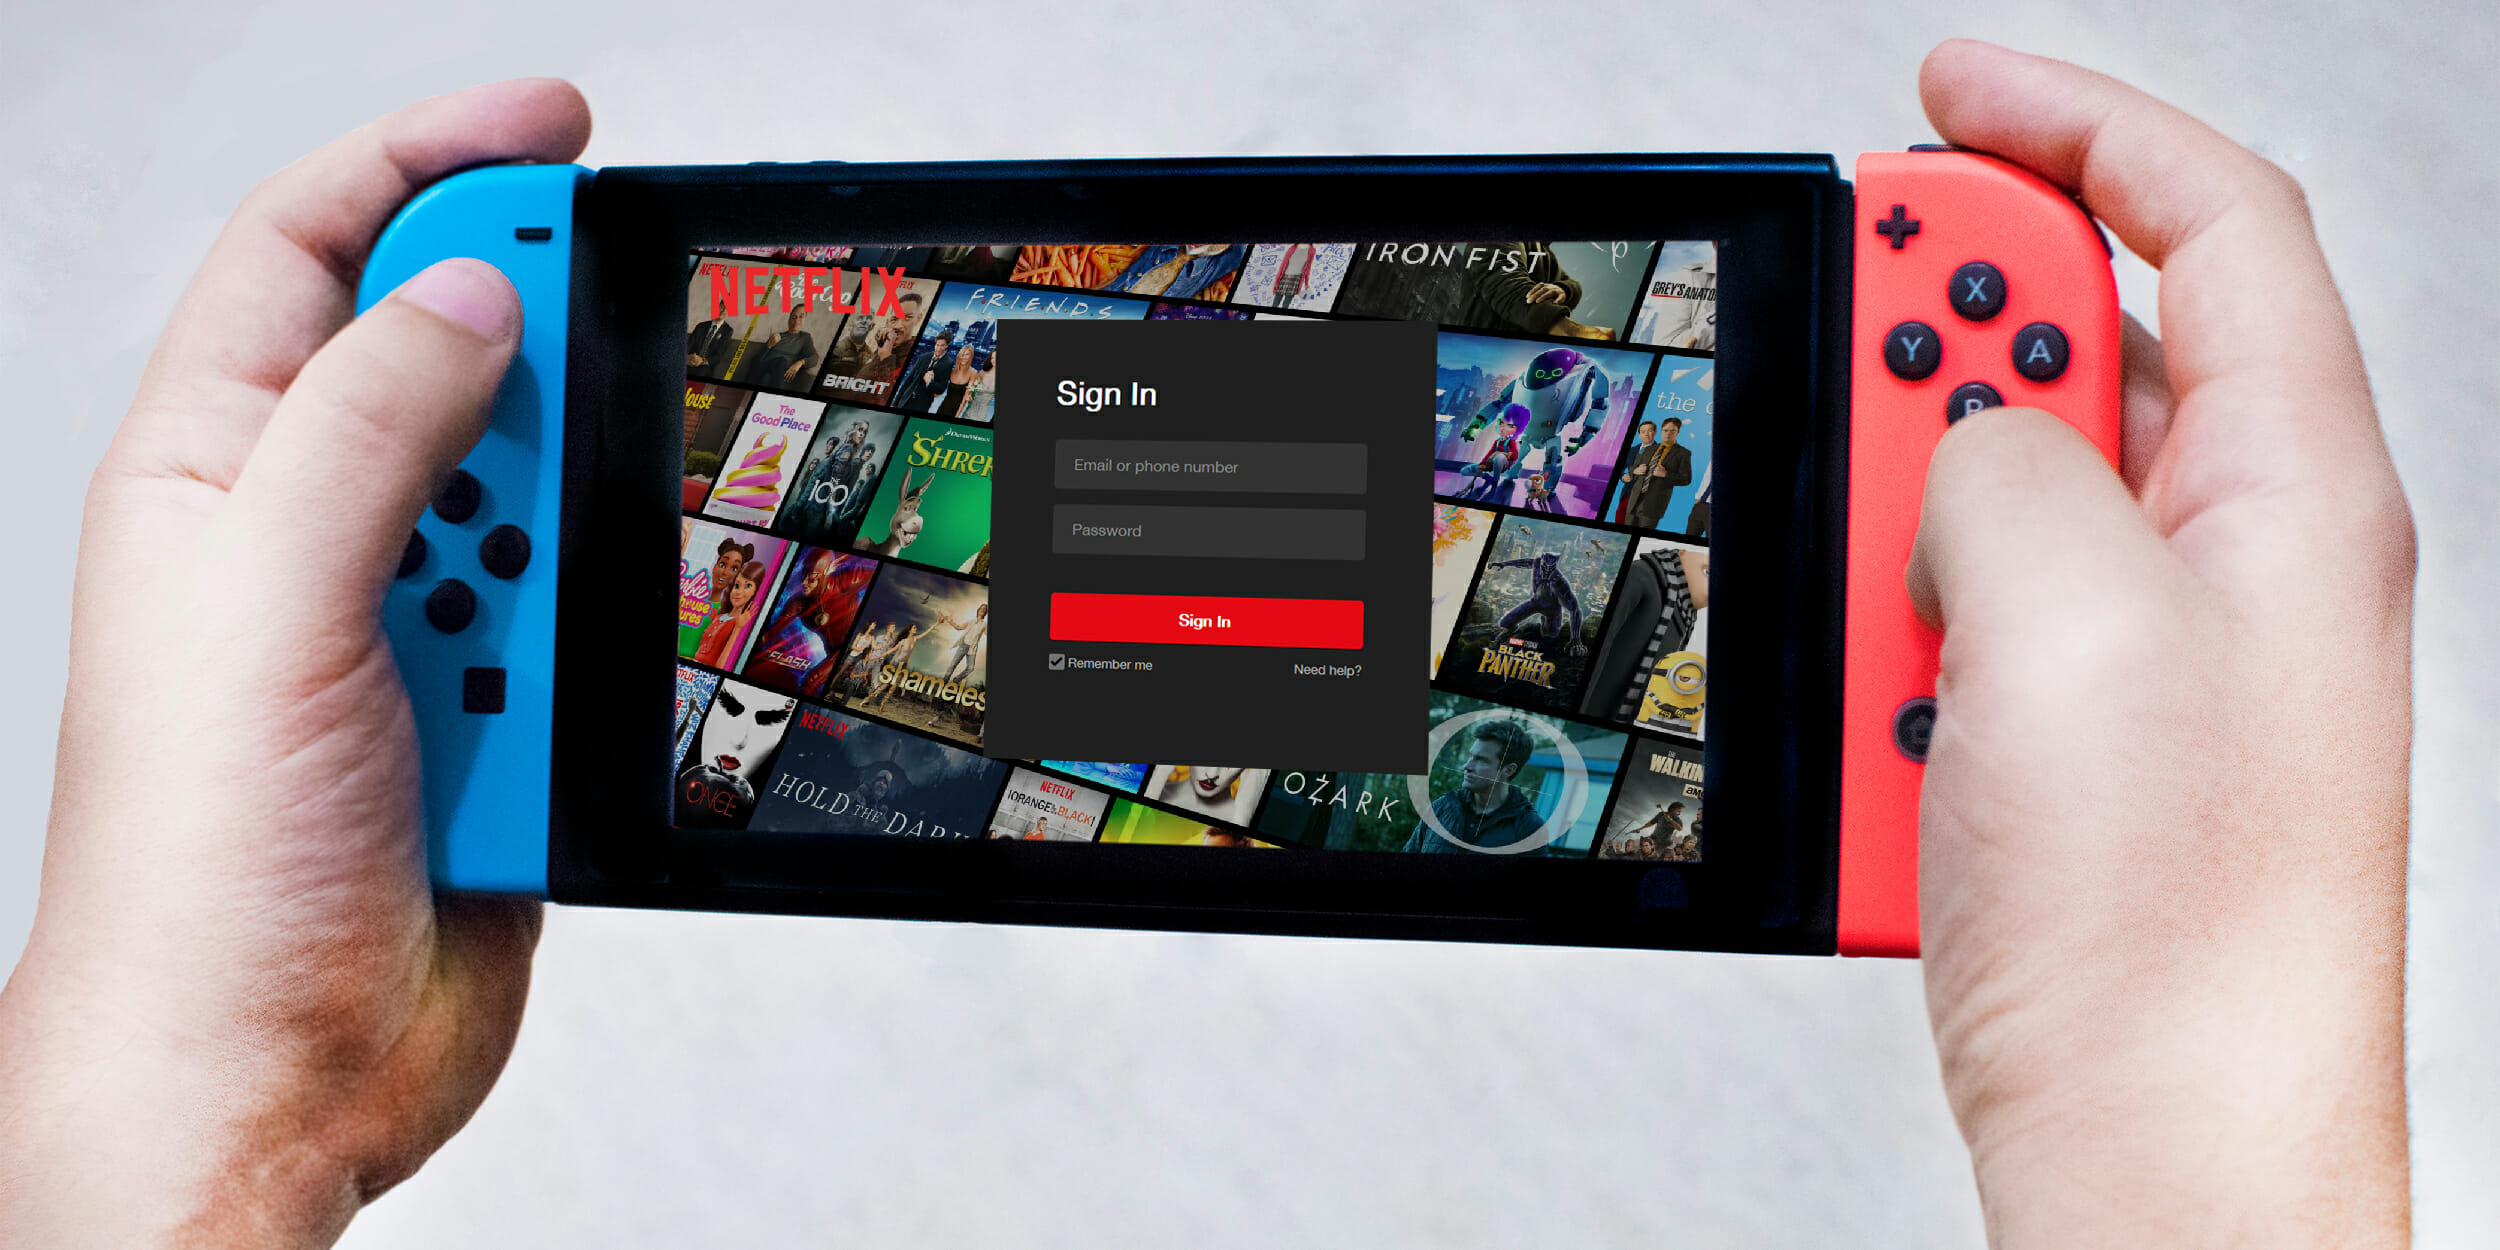 is netflix coming to switch